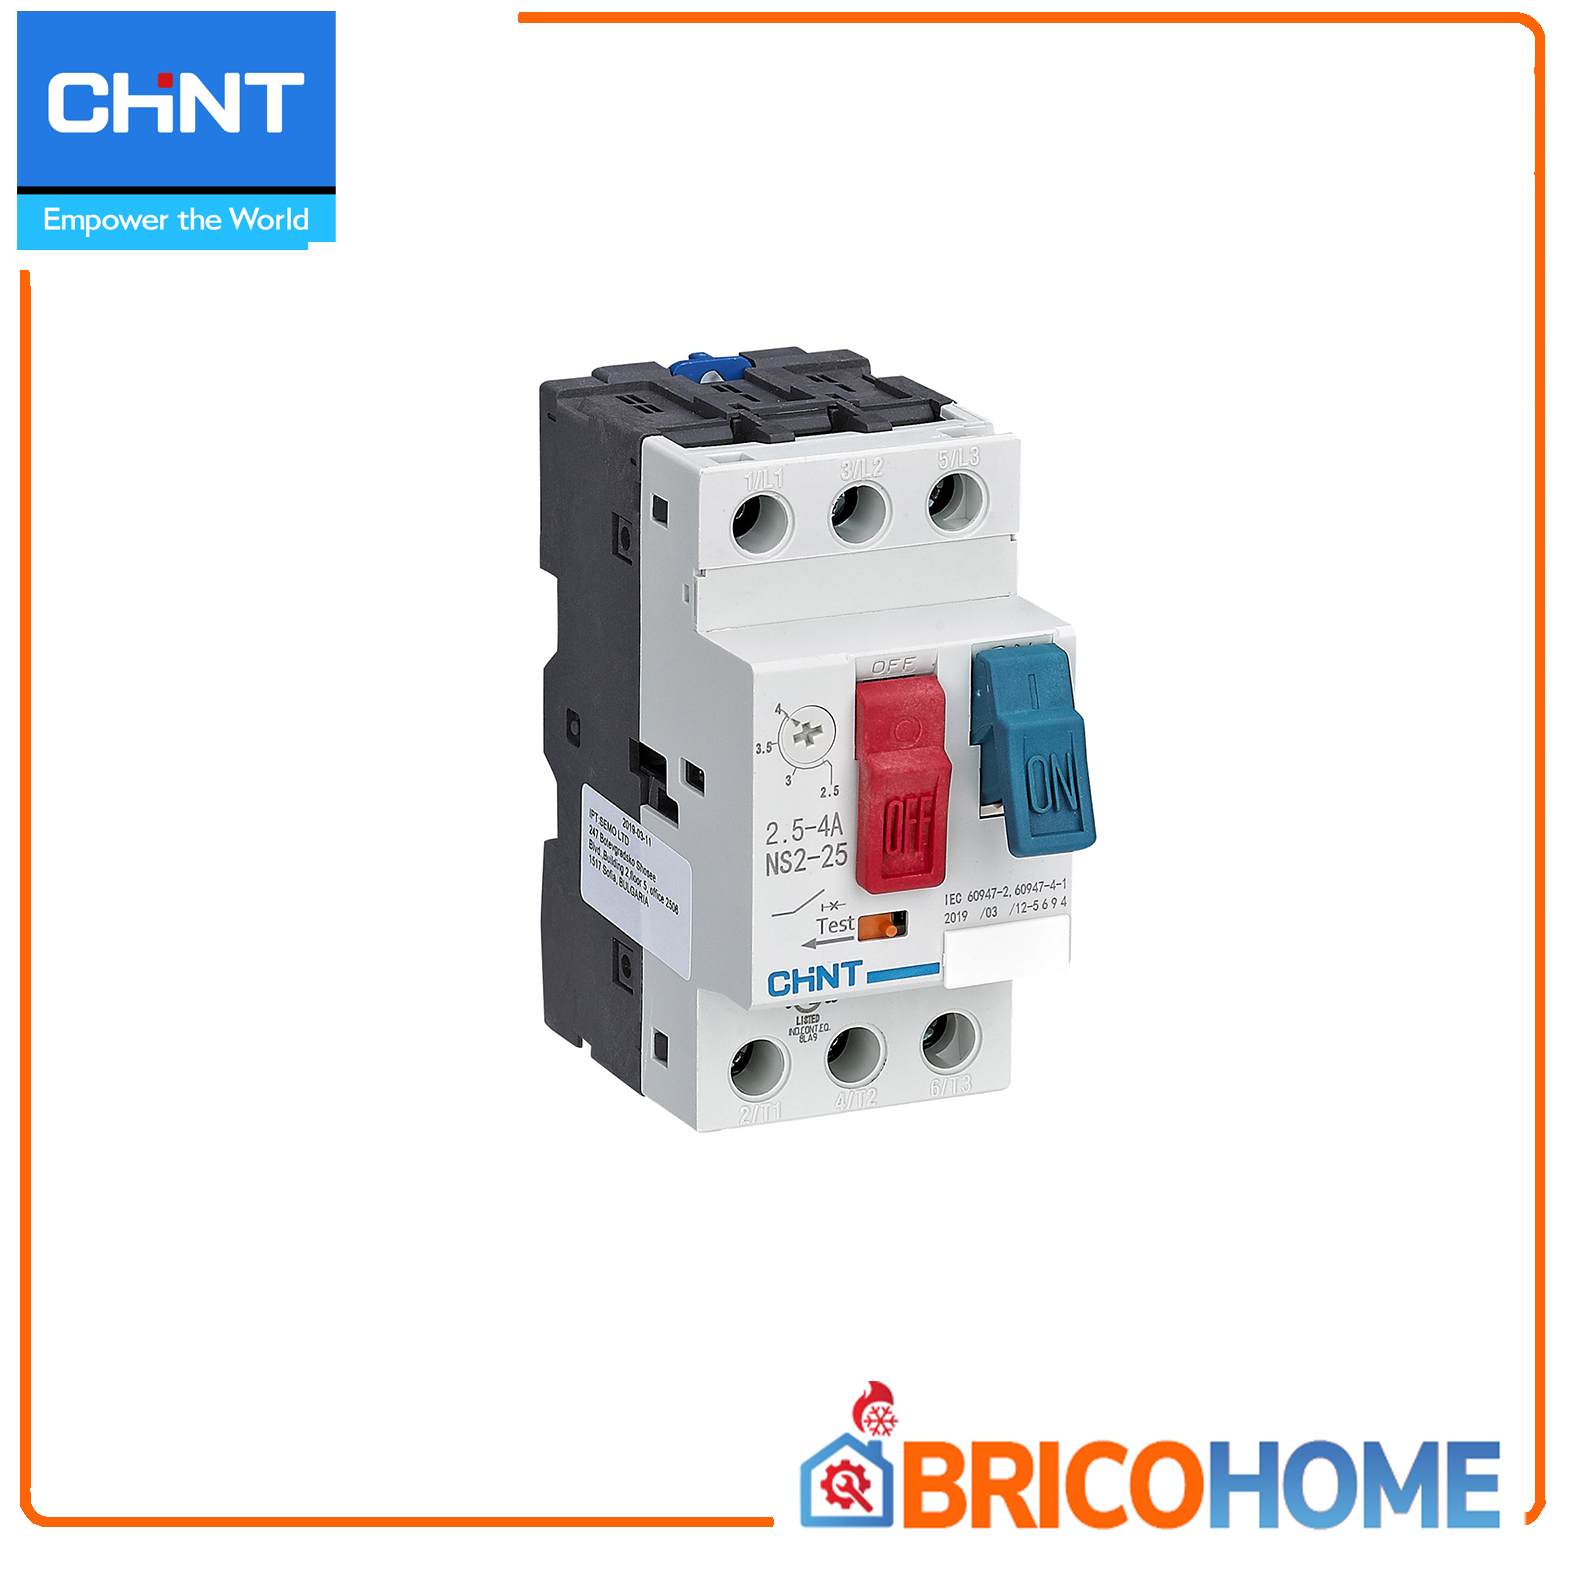 NS2-25 series motor protection switch with rocker arm 3P 2.5÷4A 100kA - CHINT